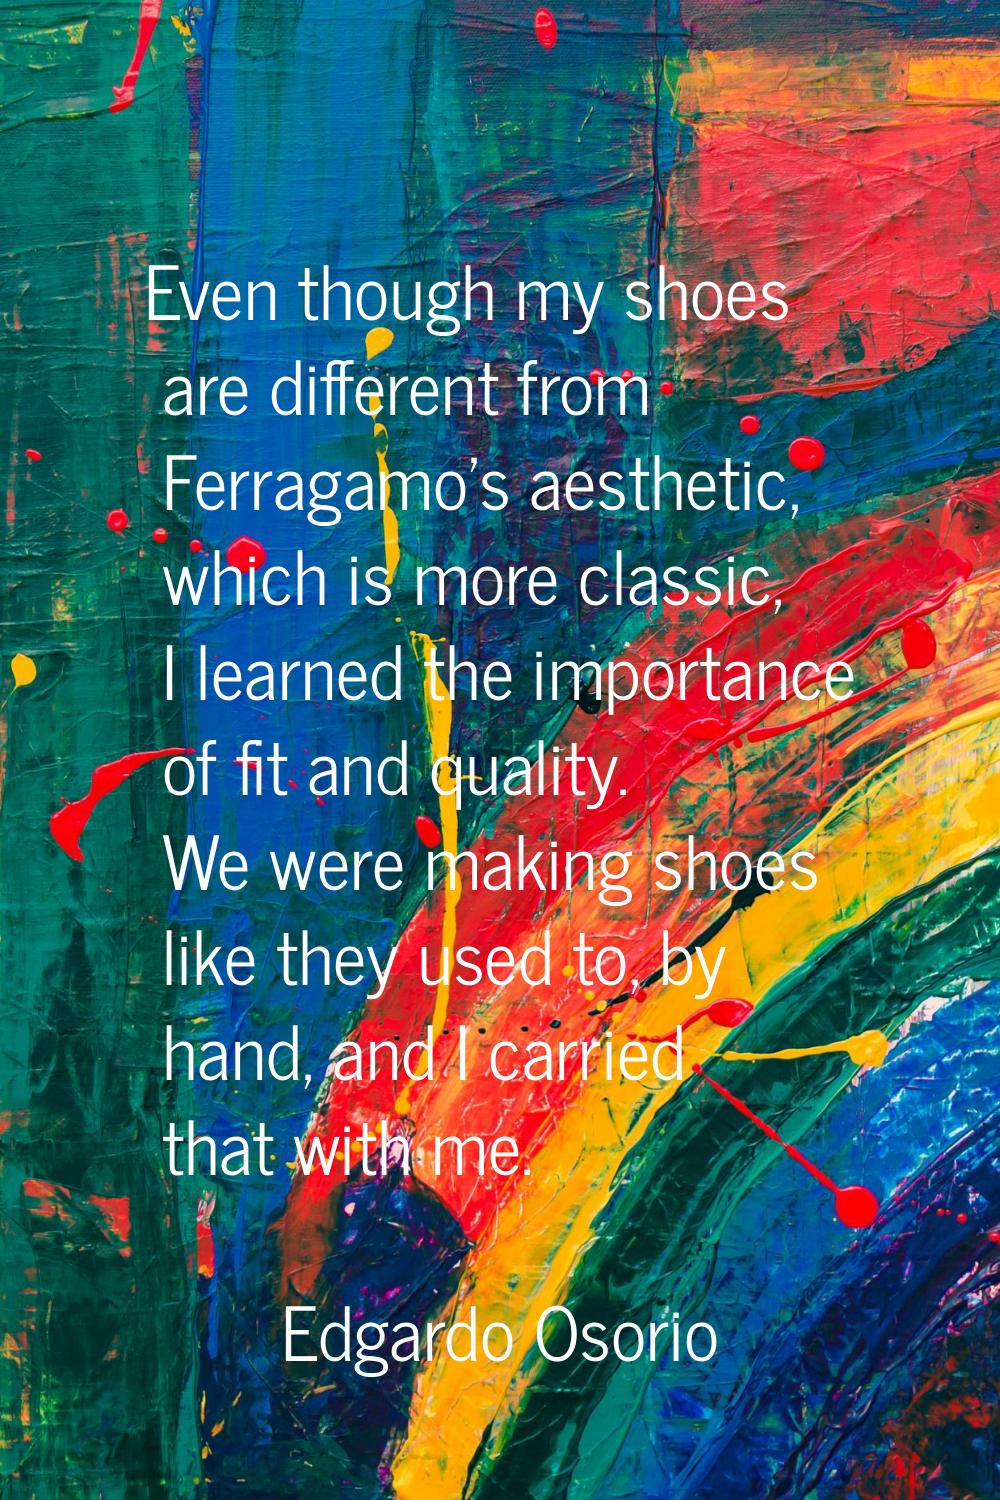 Even though my shoes are different from Ferragamo's aesthetic, which is more classic, I learned the